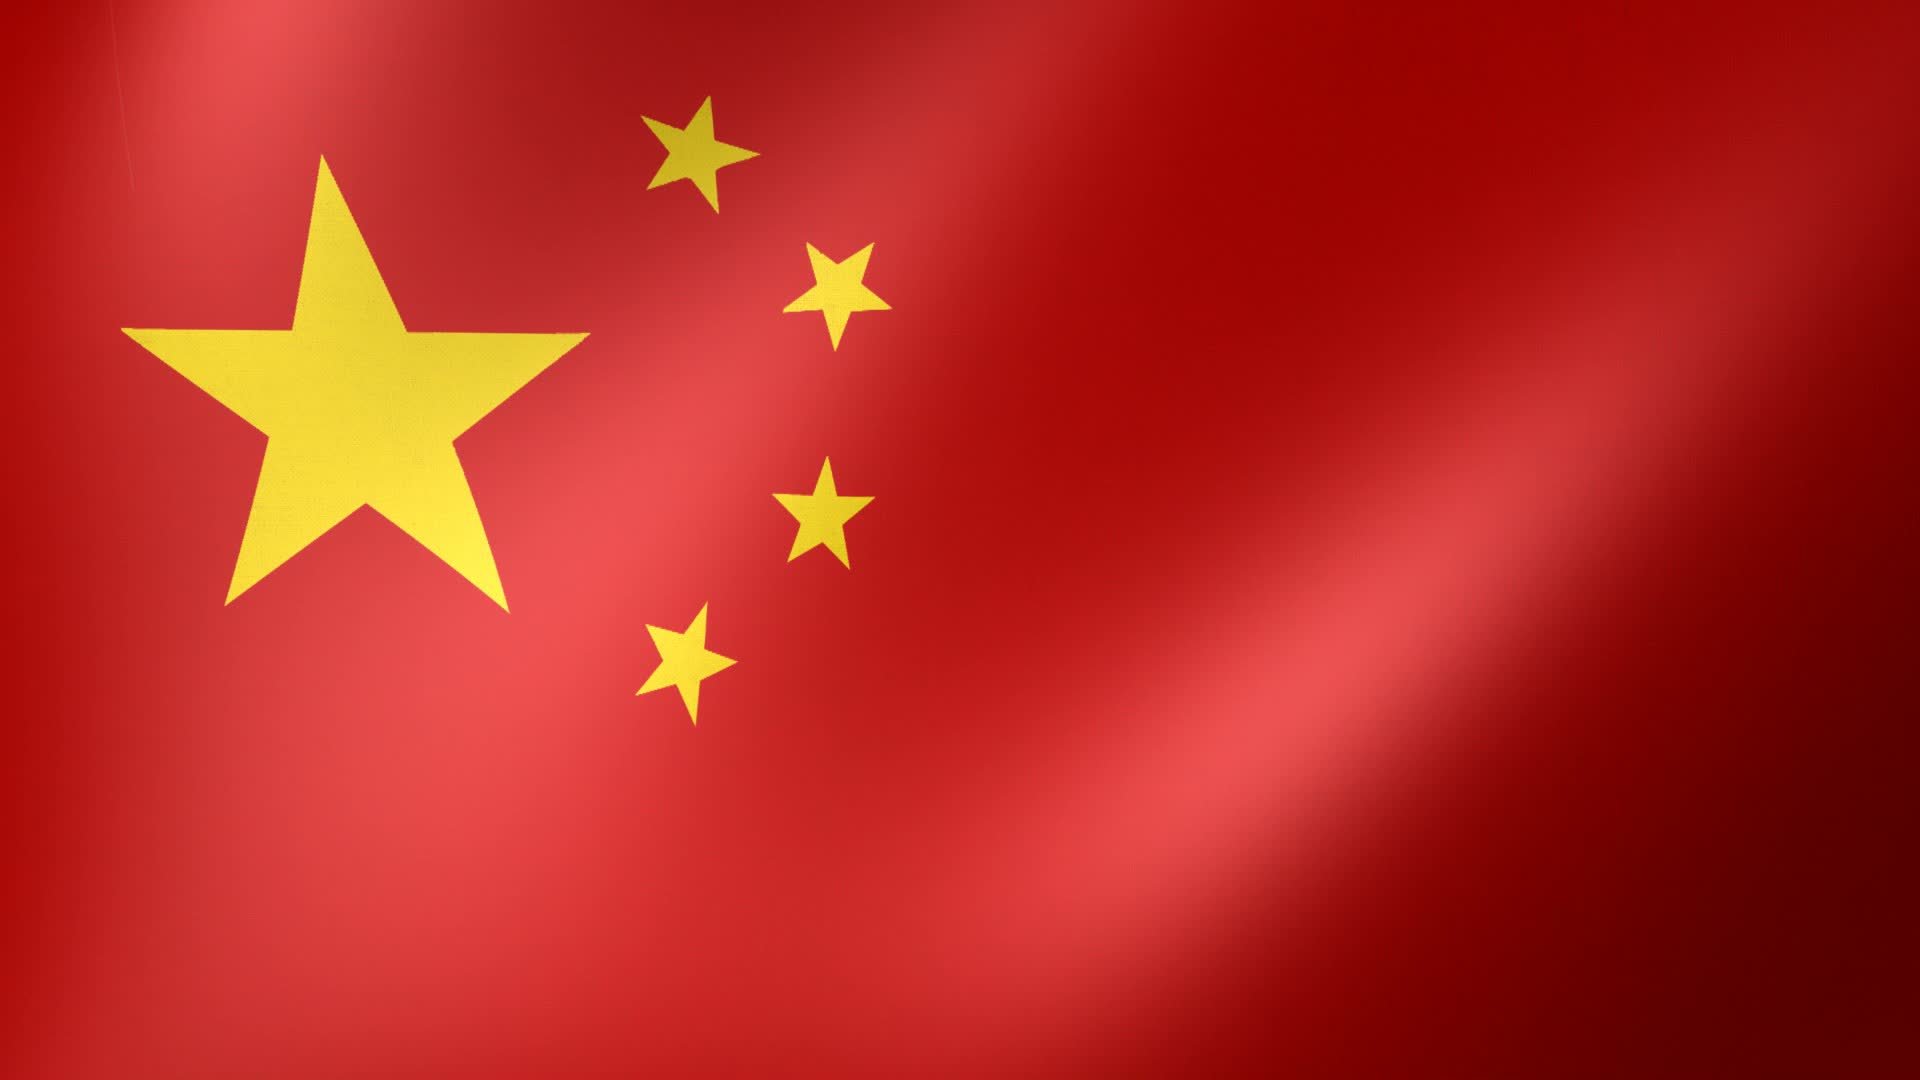 Chinese Flag Pictures toPinterest   PinsDaddy